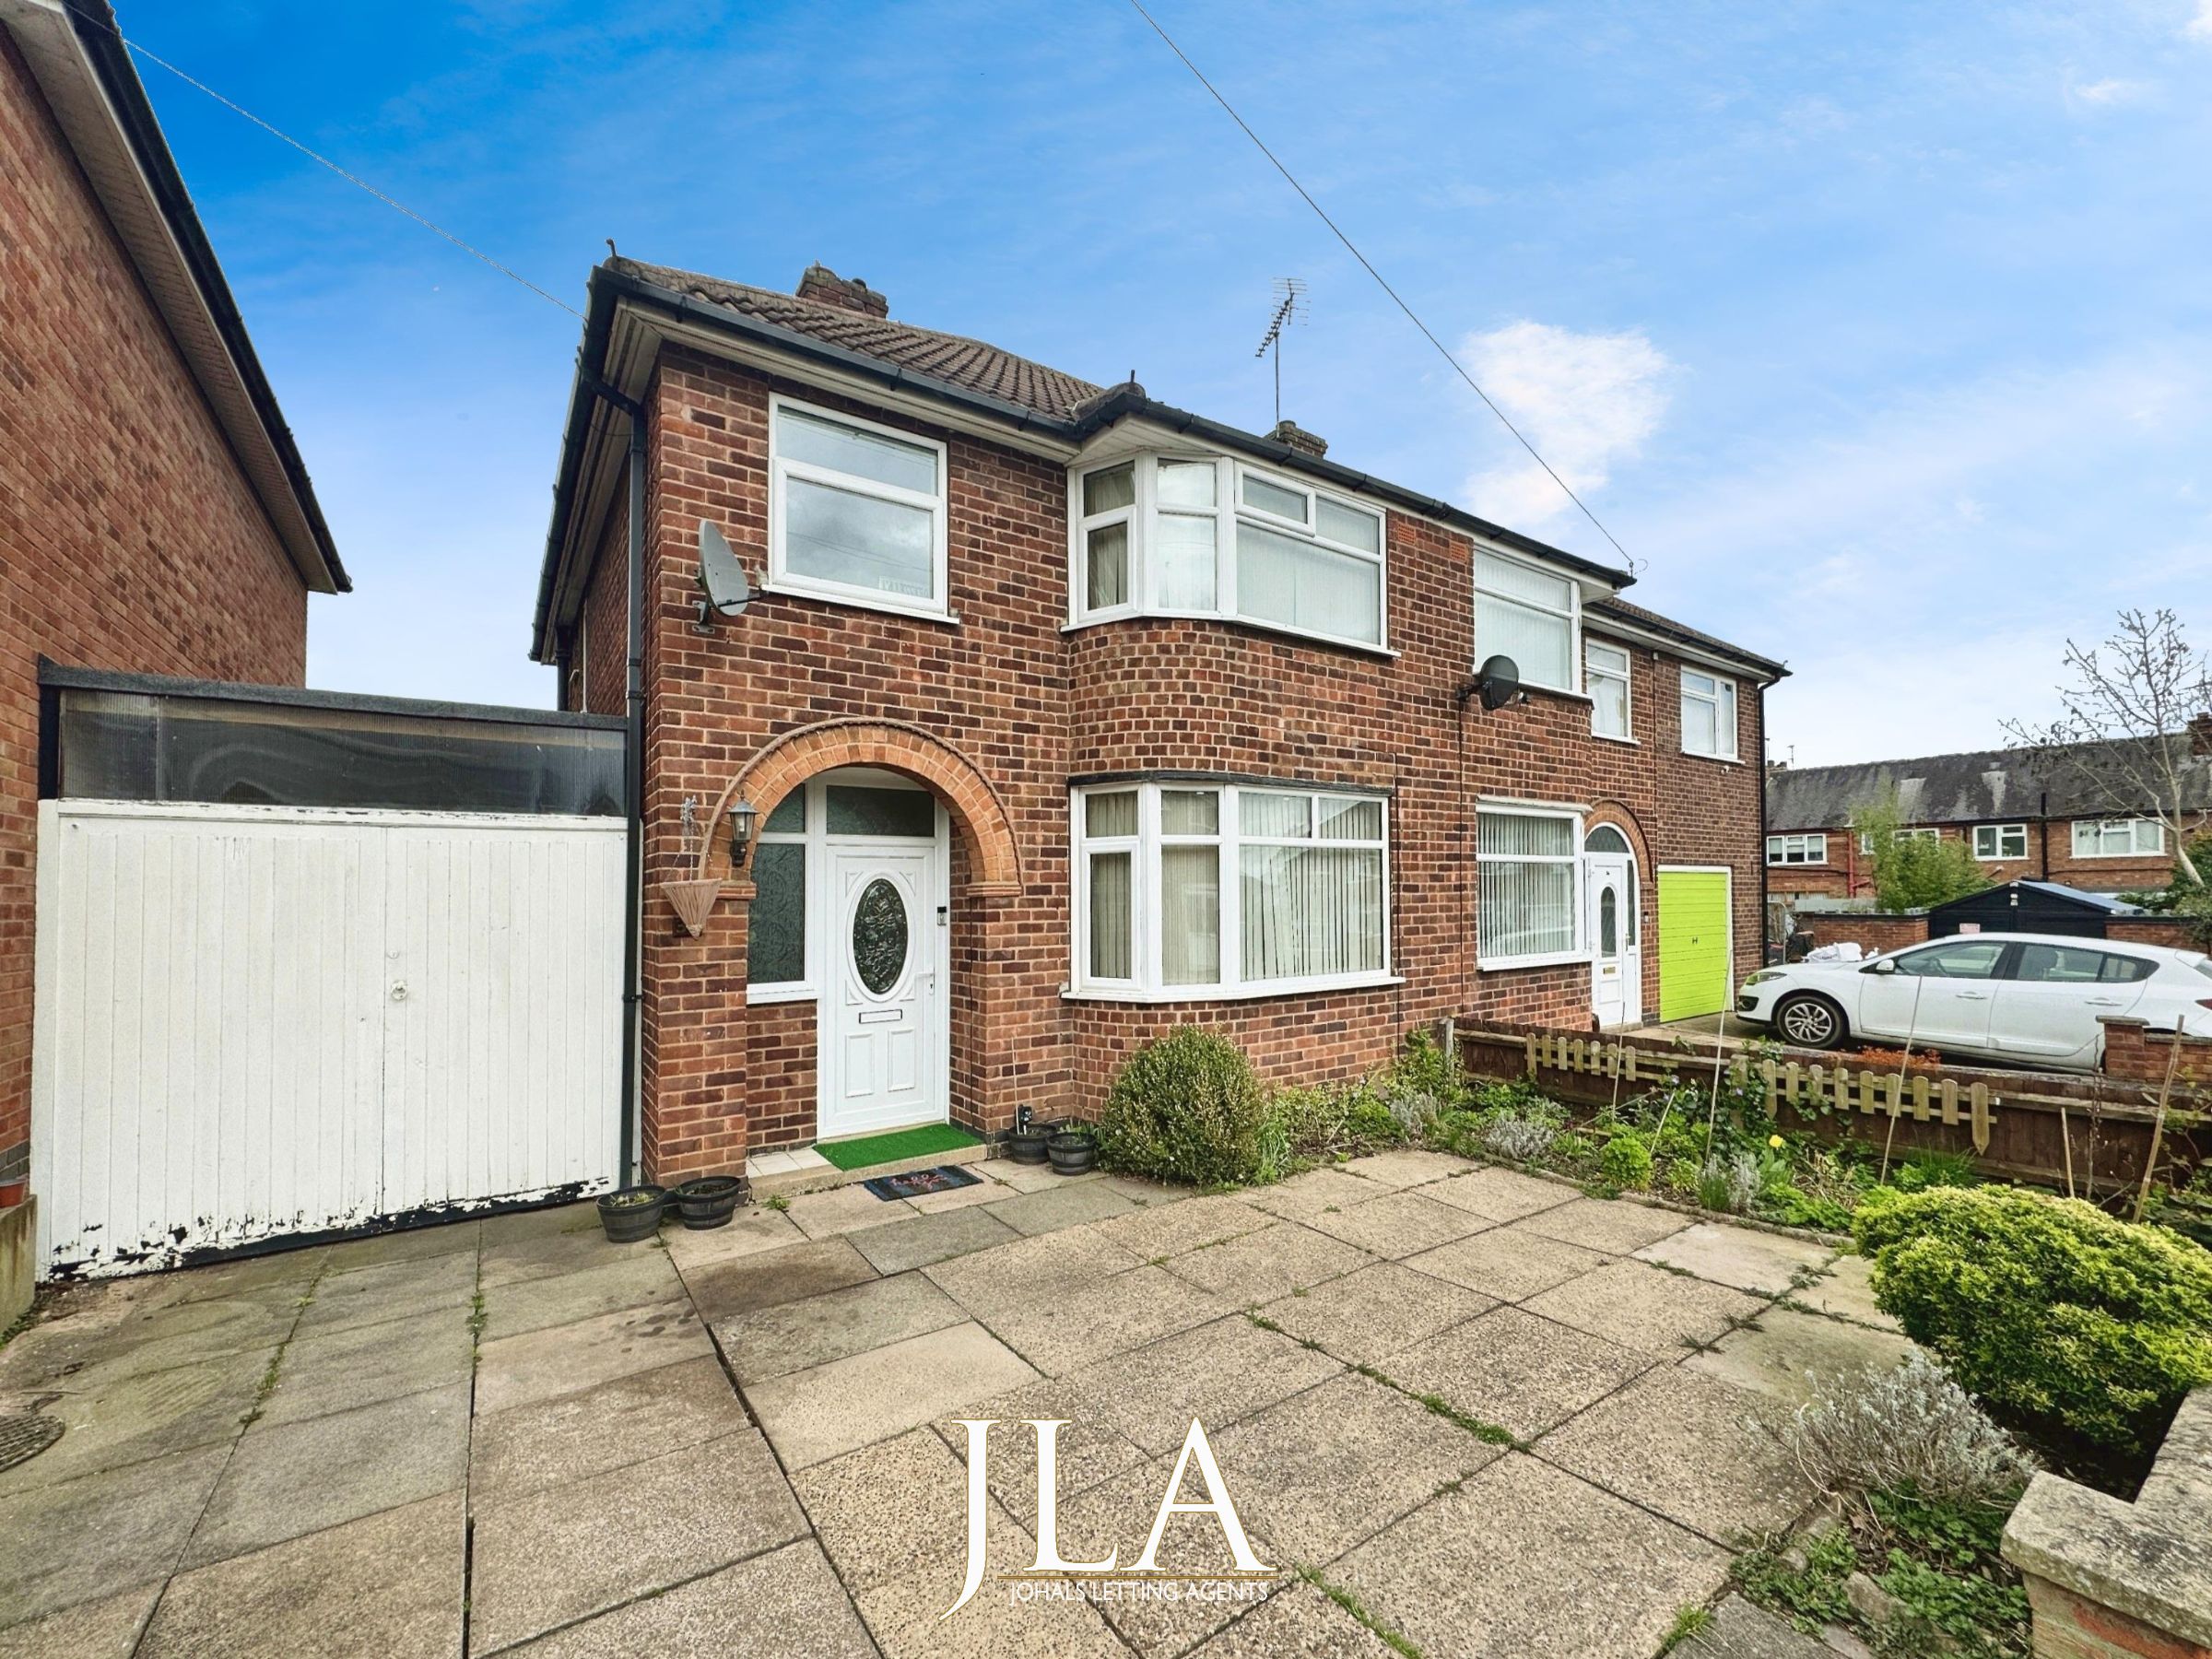 3 bed semi-detached house to rent in Edenhurst Avenue, Leicester, LE3 